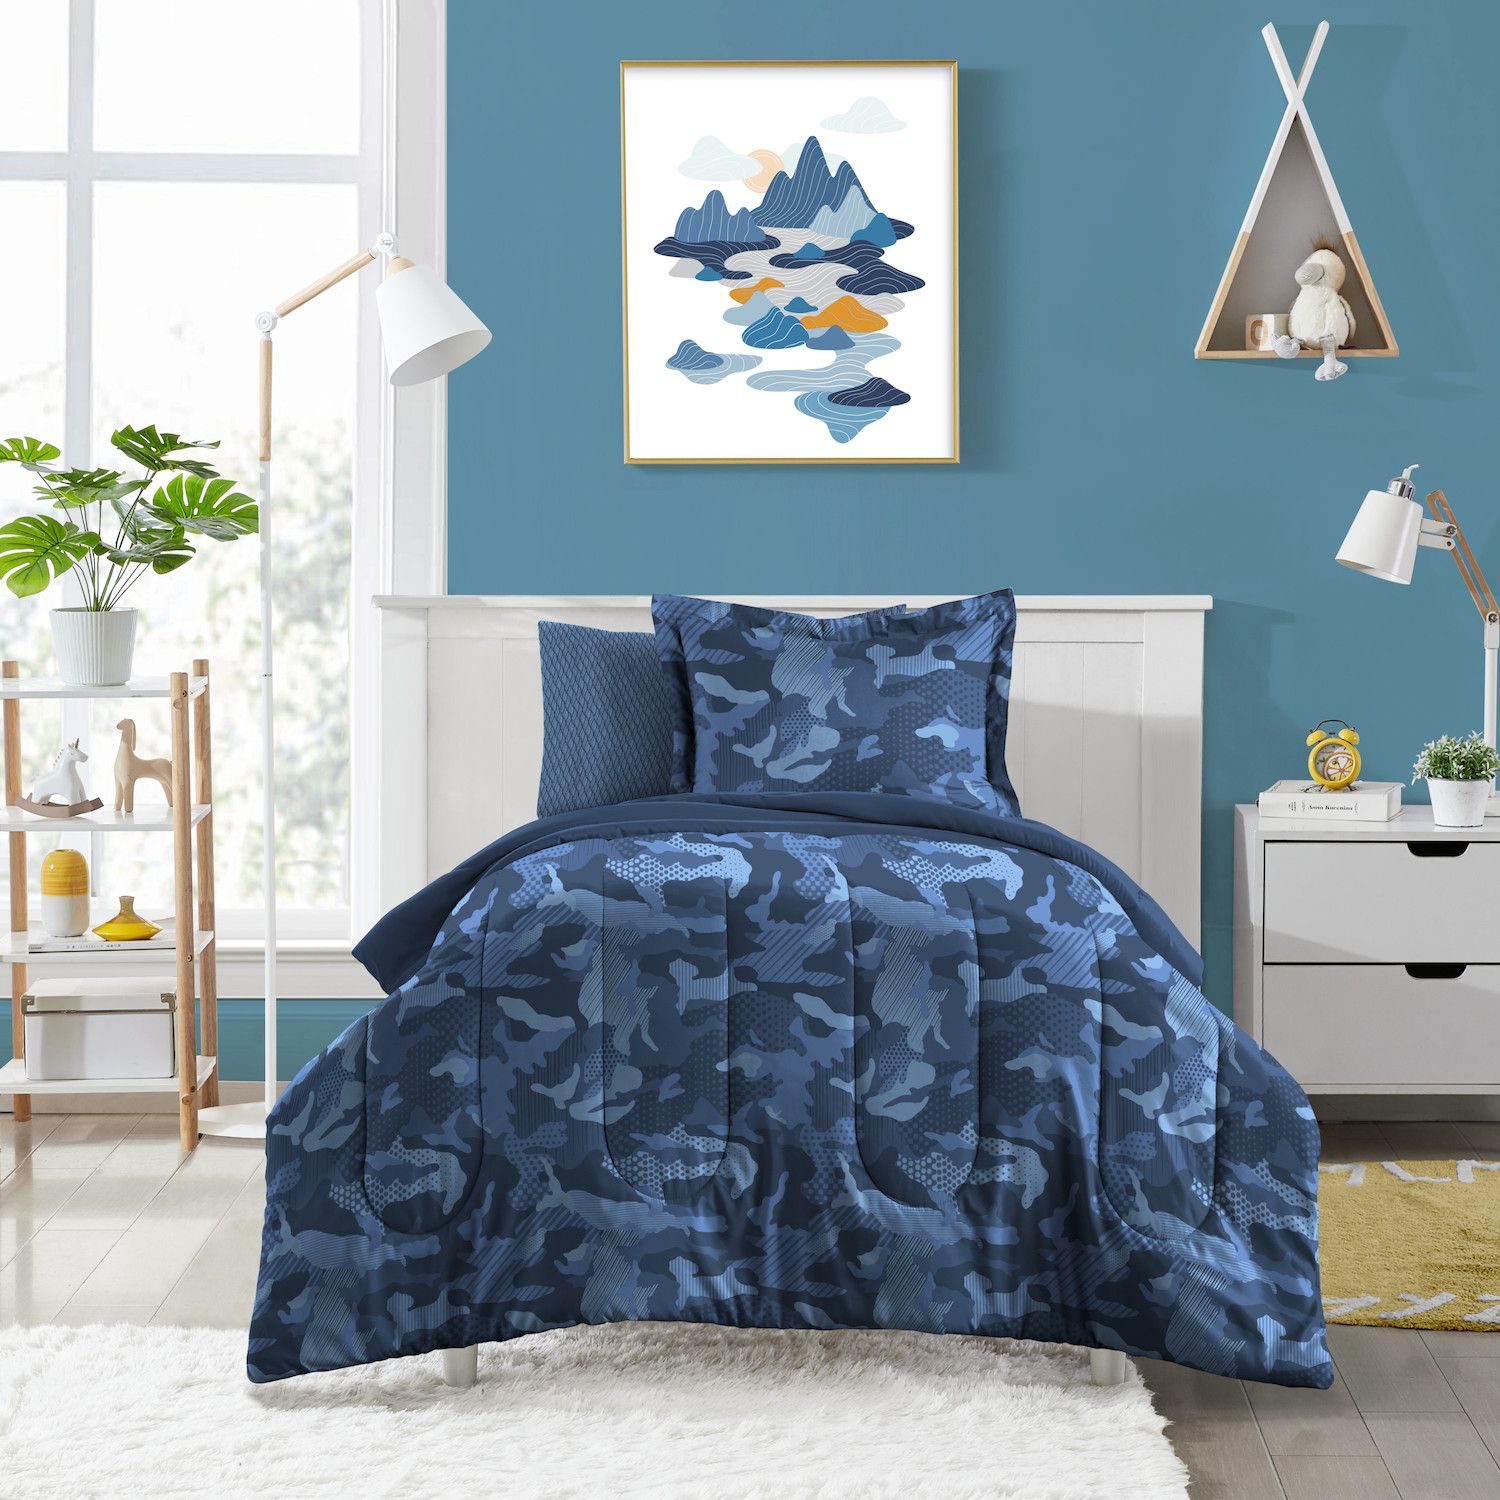 Image for Dream Factory Geo Camo Bed Set at Kohl's.